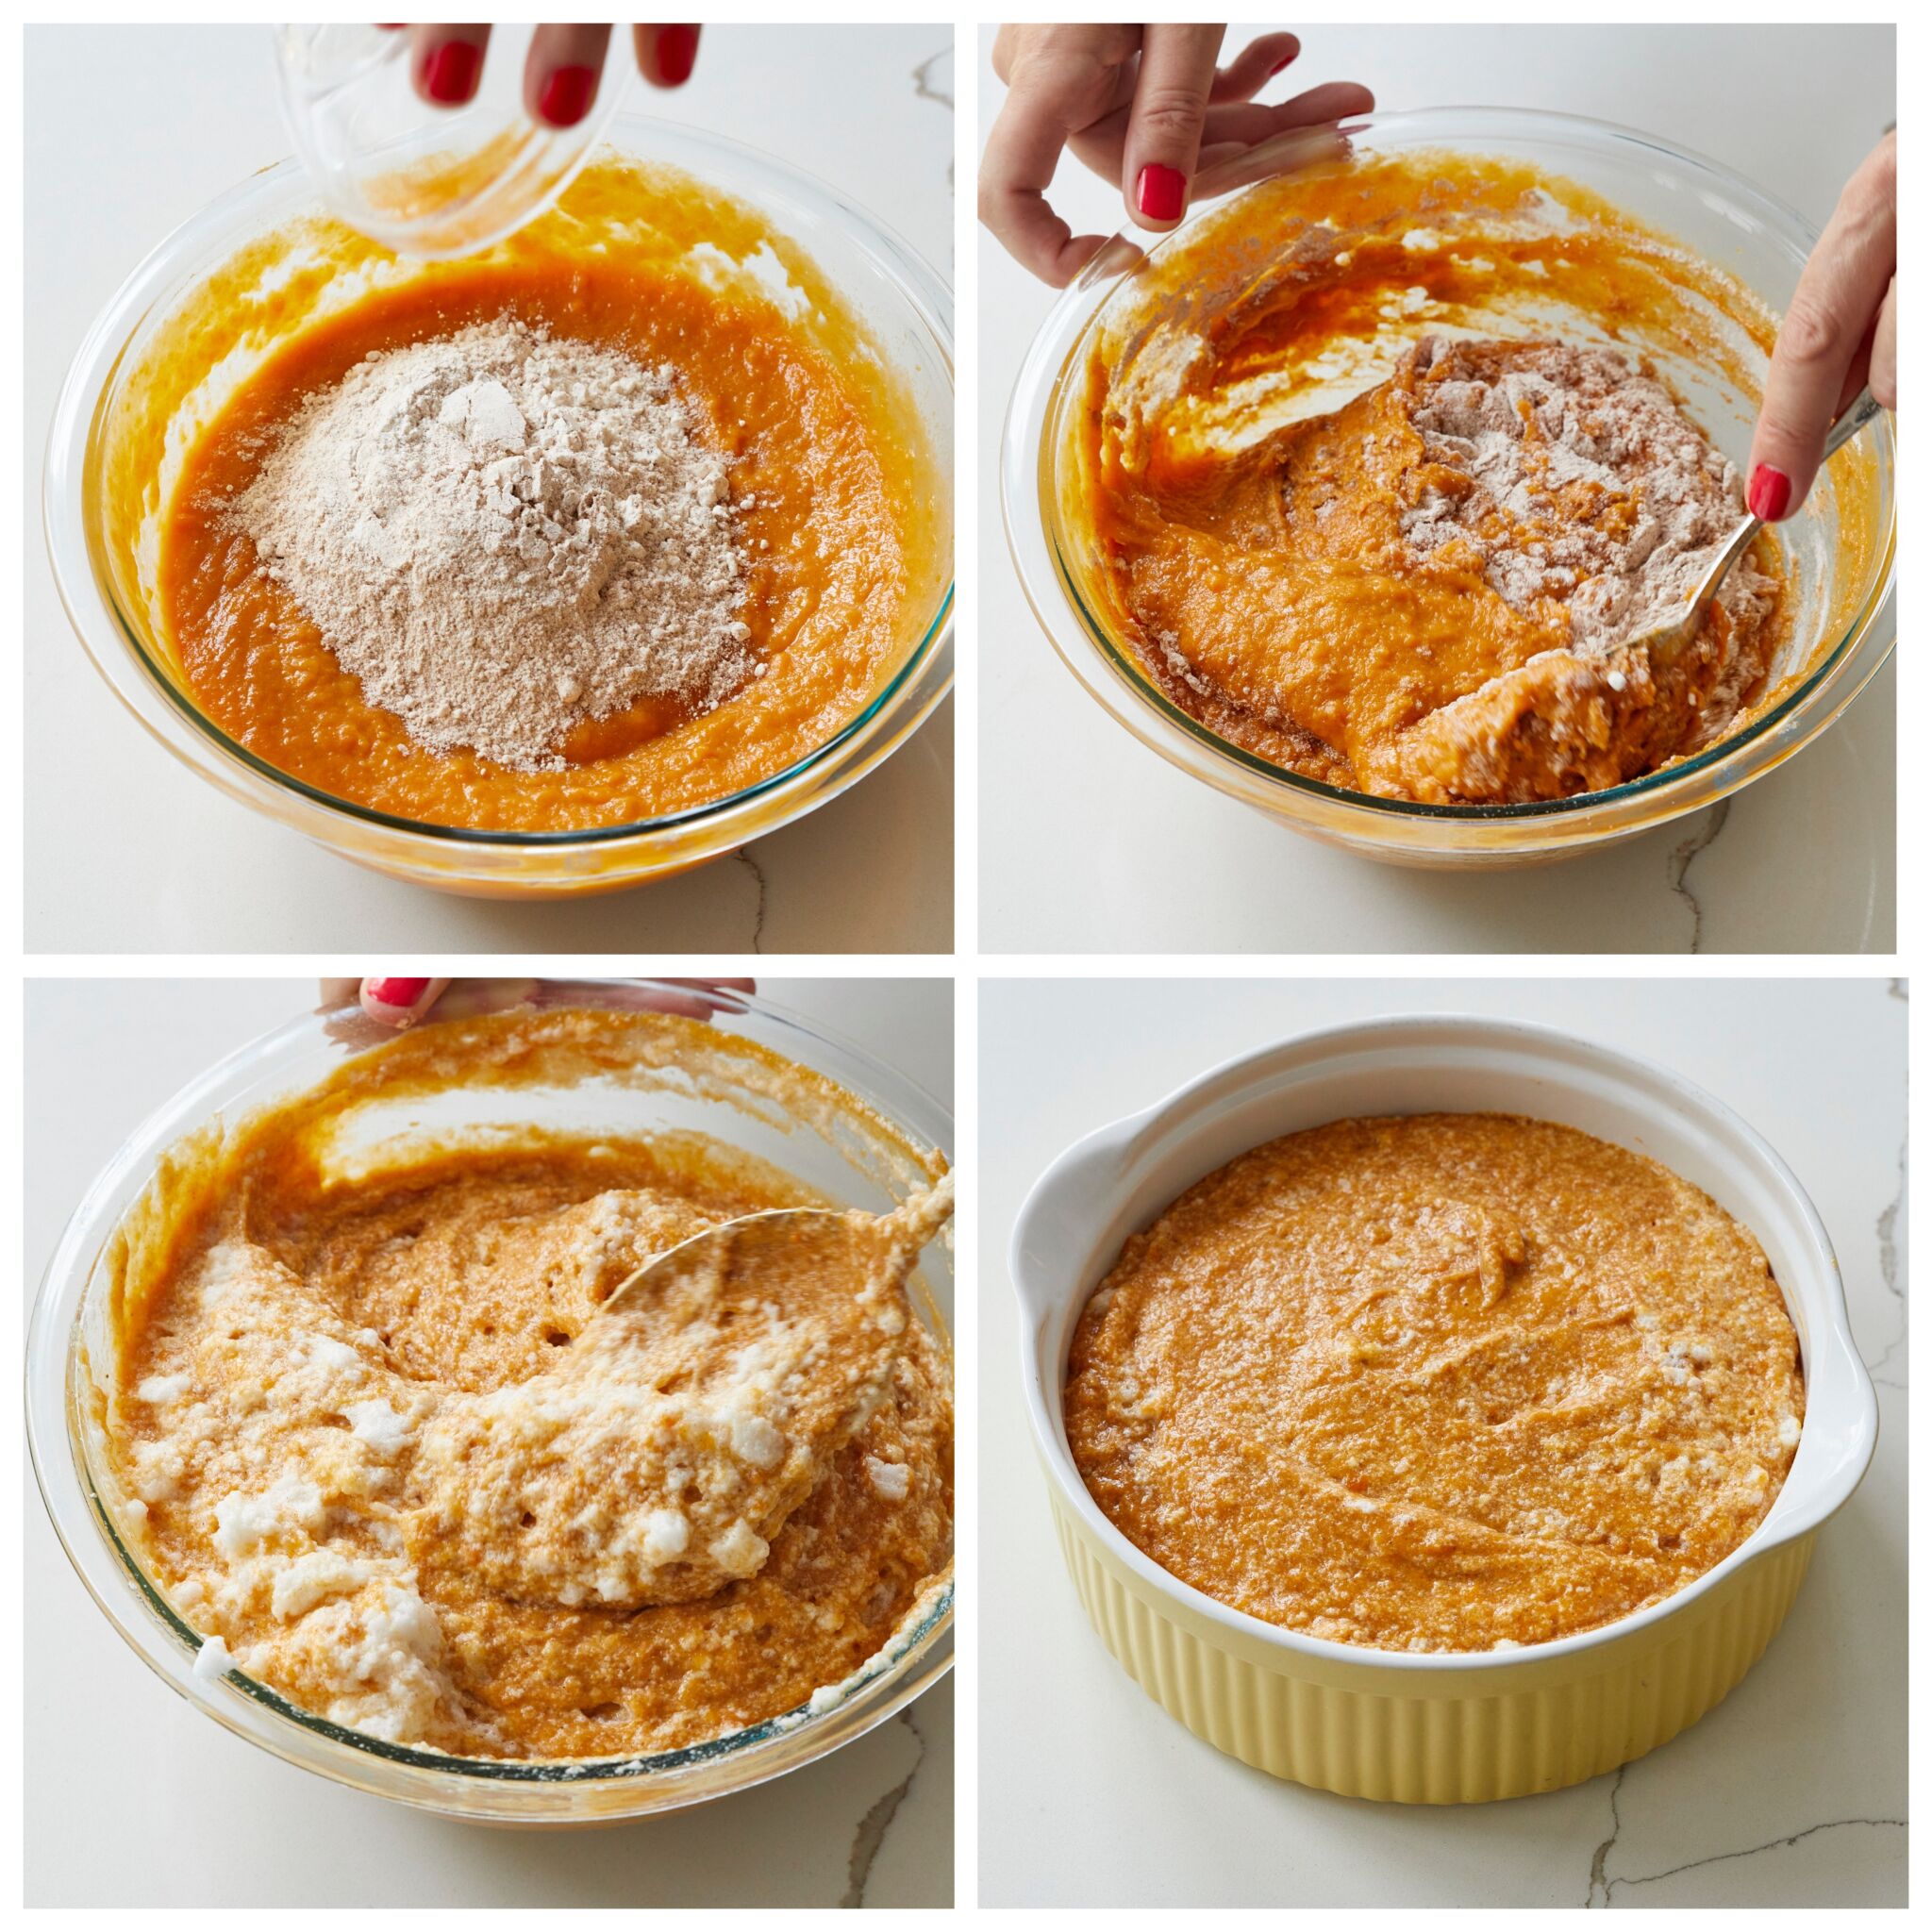 Step-by-step instruction on how to make Sweet Potato Soufflé: Add the dry ingredients including flour, baking powder, salt, allspice, and cinnamon, to the wet soufflé mixture, mix until just blended. Whip and add the egg whites. In a clean bowl, whip the egg whites to stiff, glossy peaks. With a thin metal spoon, fold 1/3 of the egg whites into the sweet potato mixture. Fold in the remaining egg whites.